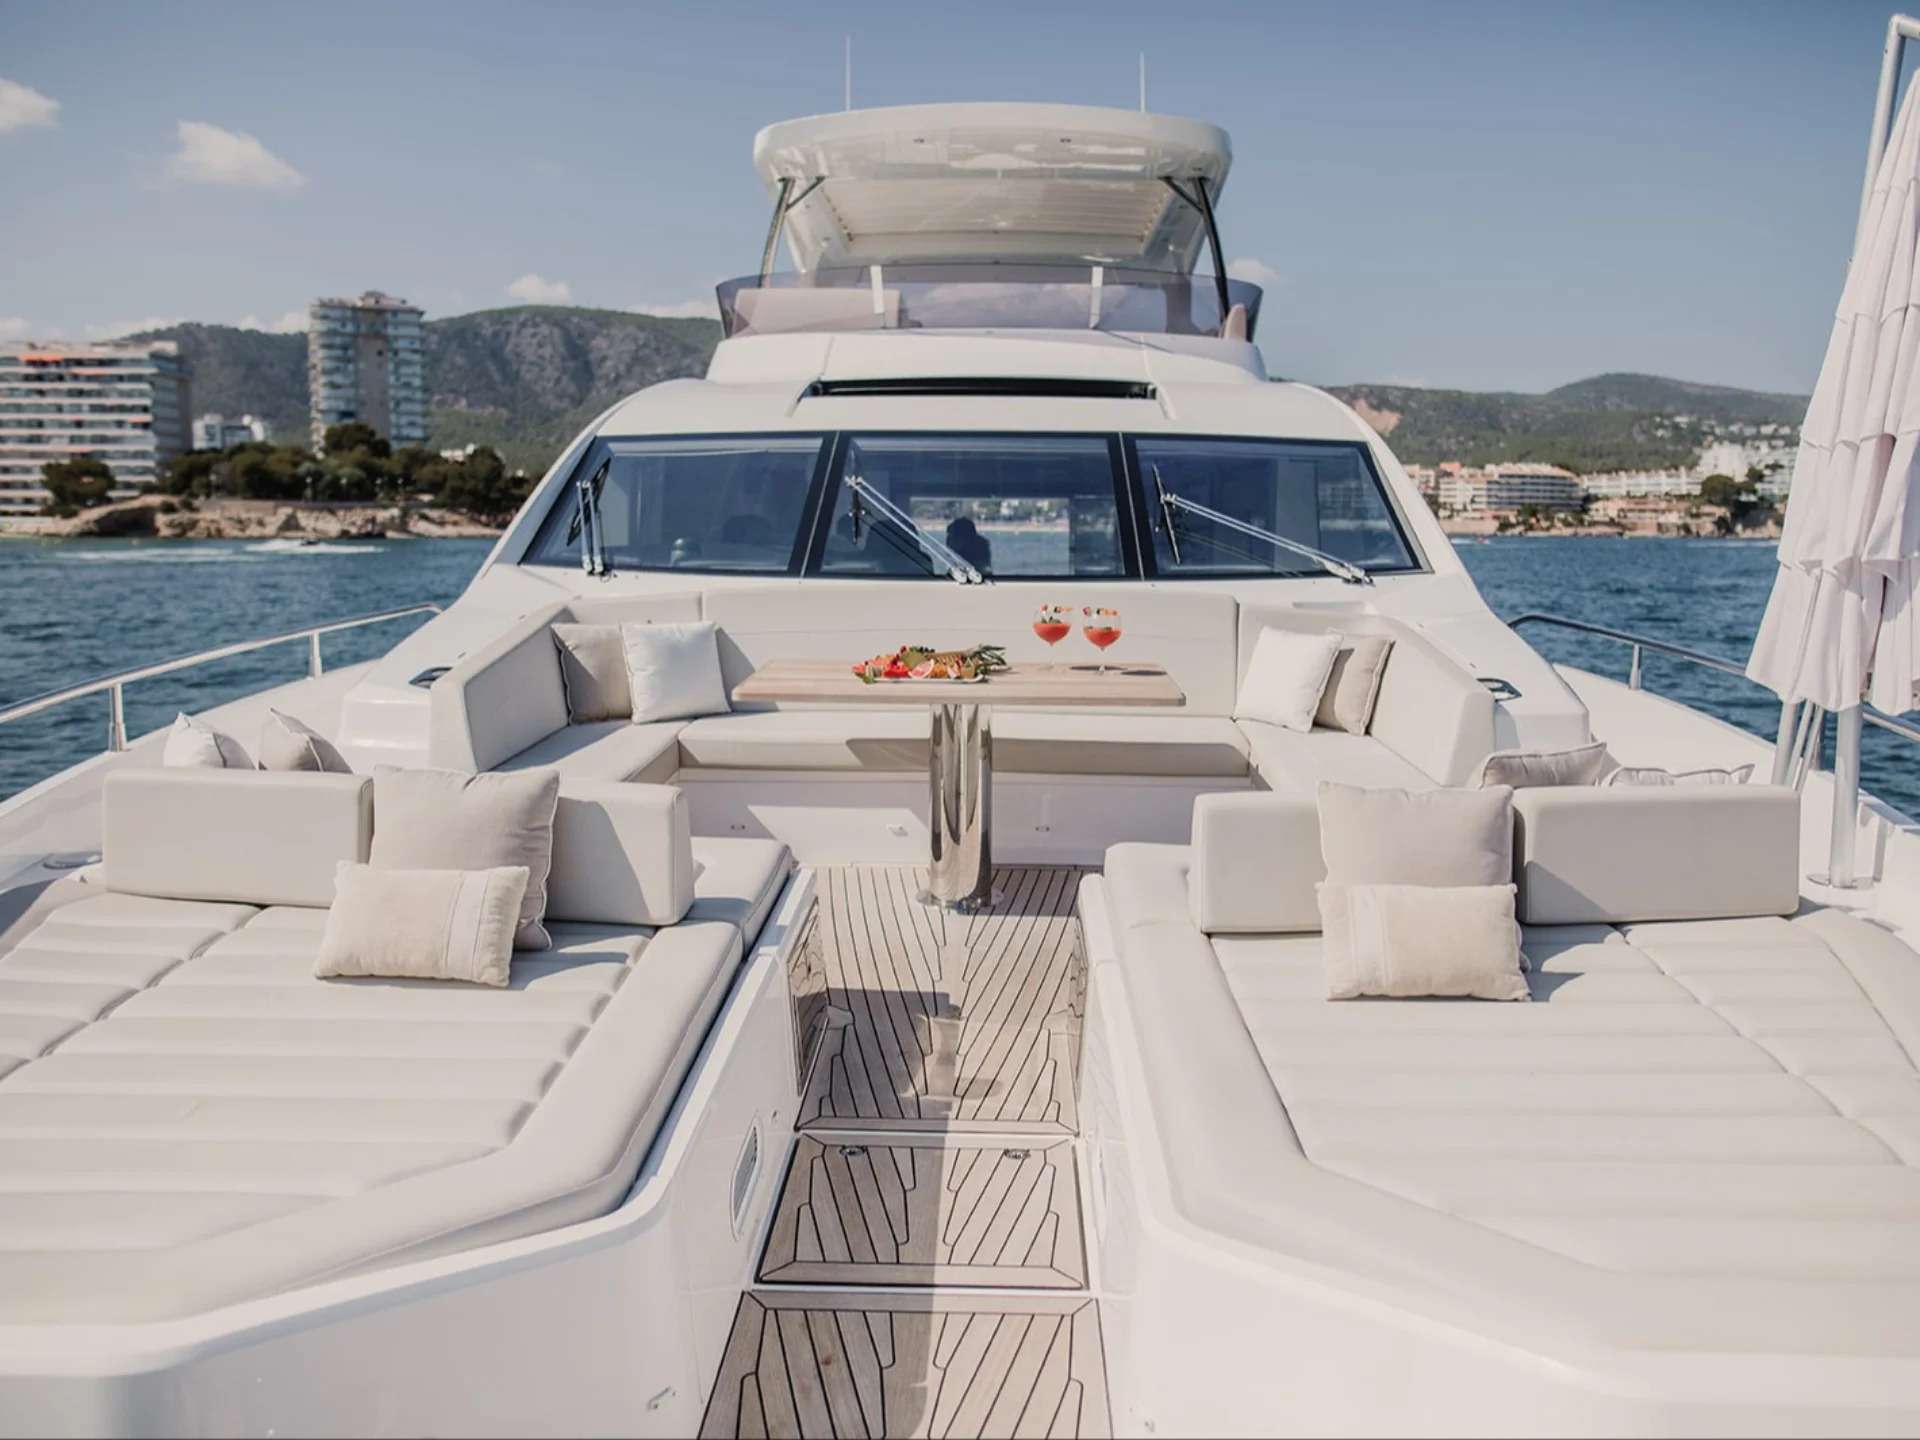 LADY M - Yacht Charter Montenegro & Boat hire in W. Med -Naples/Sicily, W. Med -Riviera/Cors/Sard., W. Med - Spain/Balearics 4